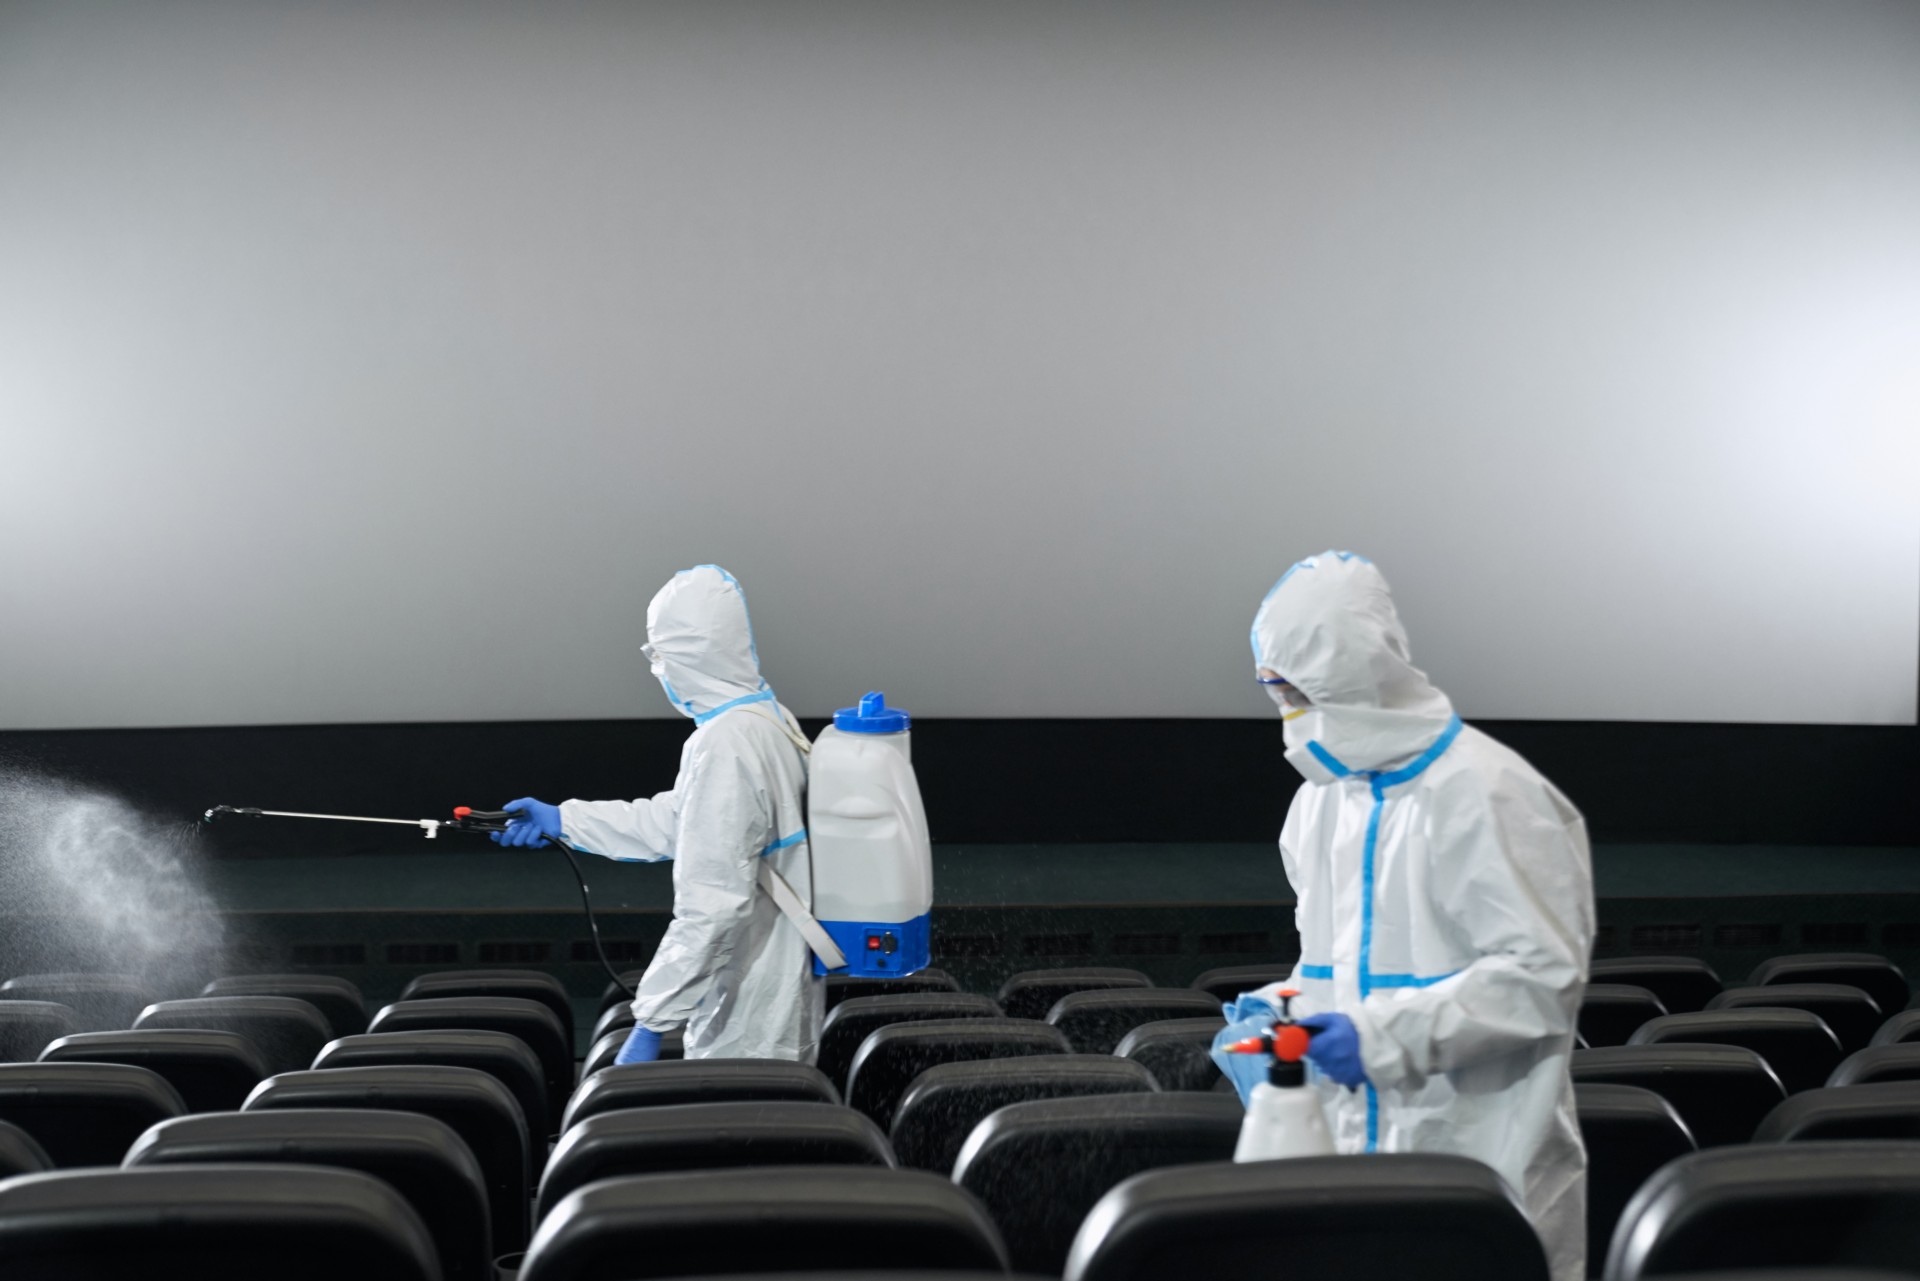 workers cleaning cinema hall with disinfectants 2022 02 03 11 18 56 utc